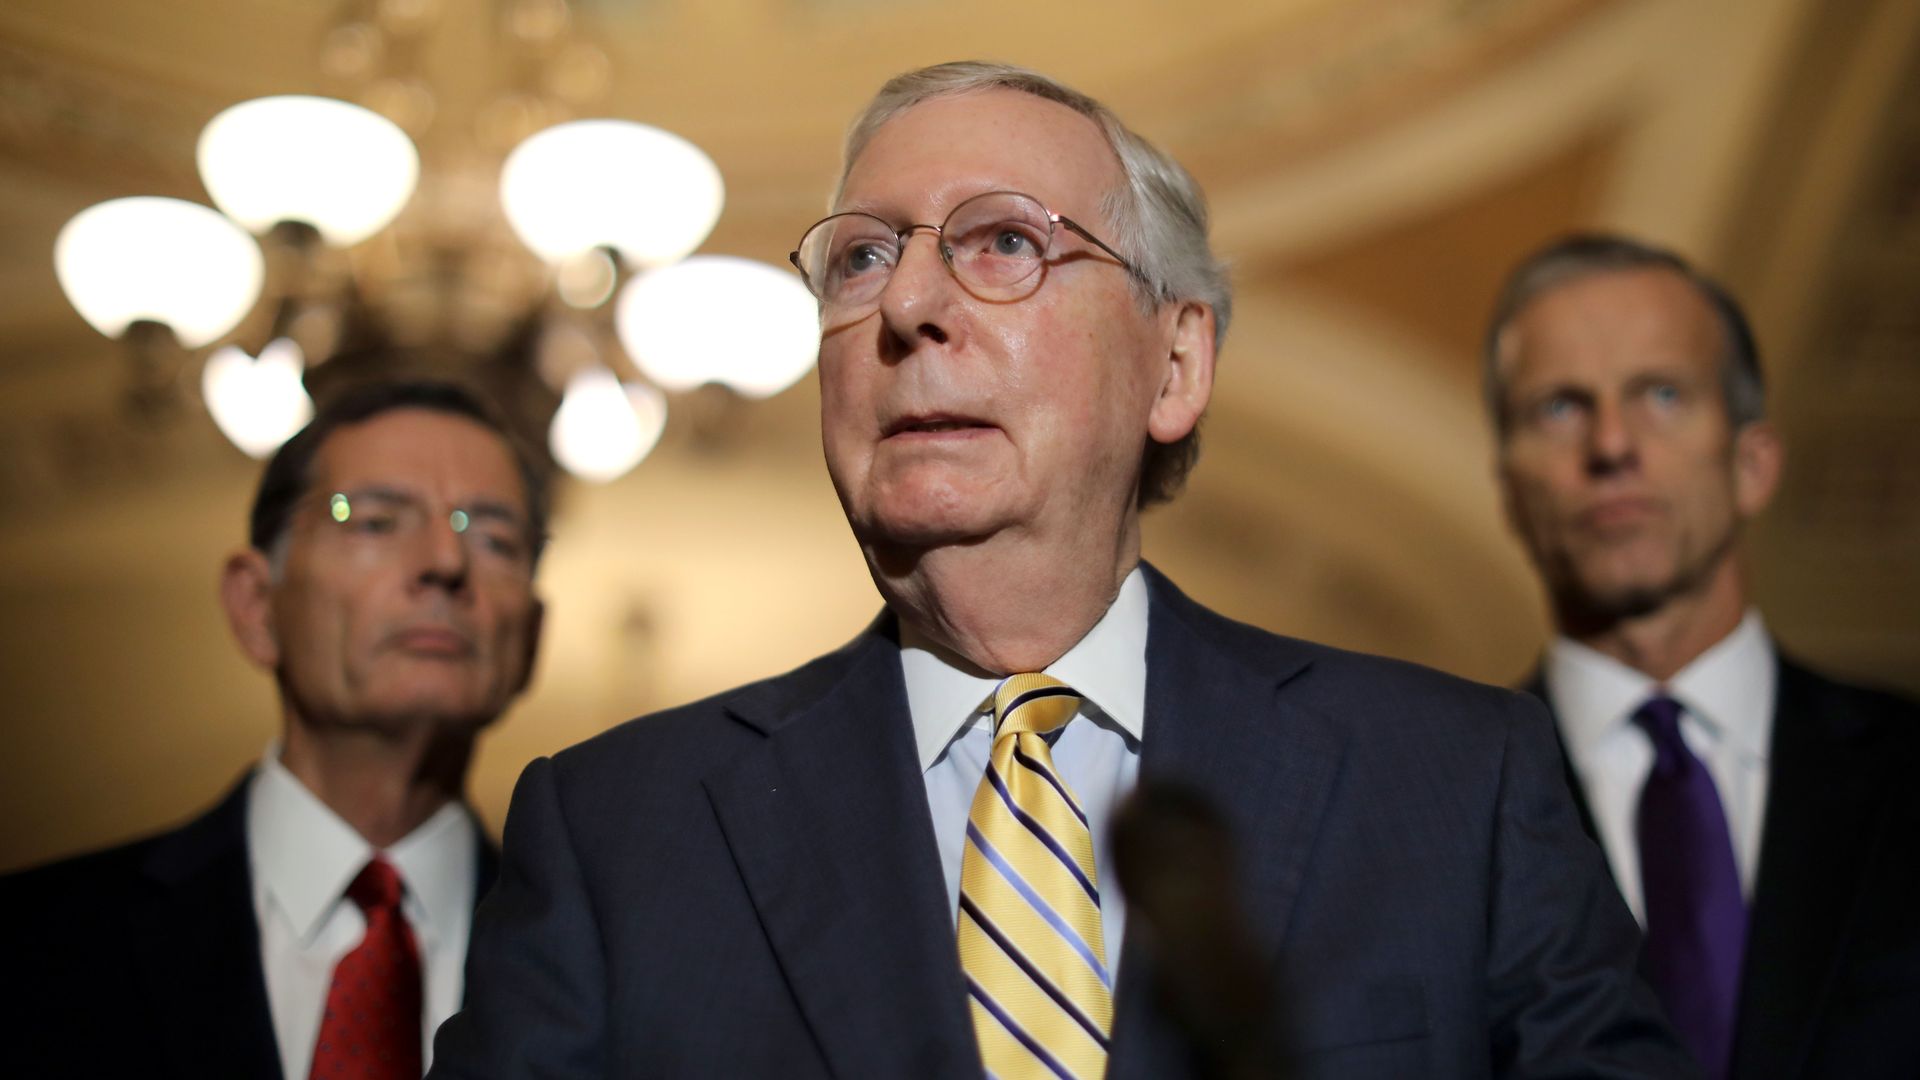 Senate Majority Leader Mitch McConnell. Photo: Chip Somodevilla/Getty Images